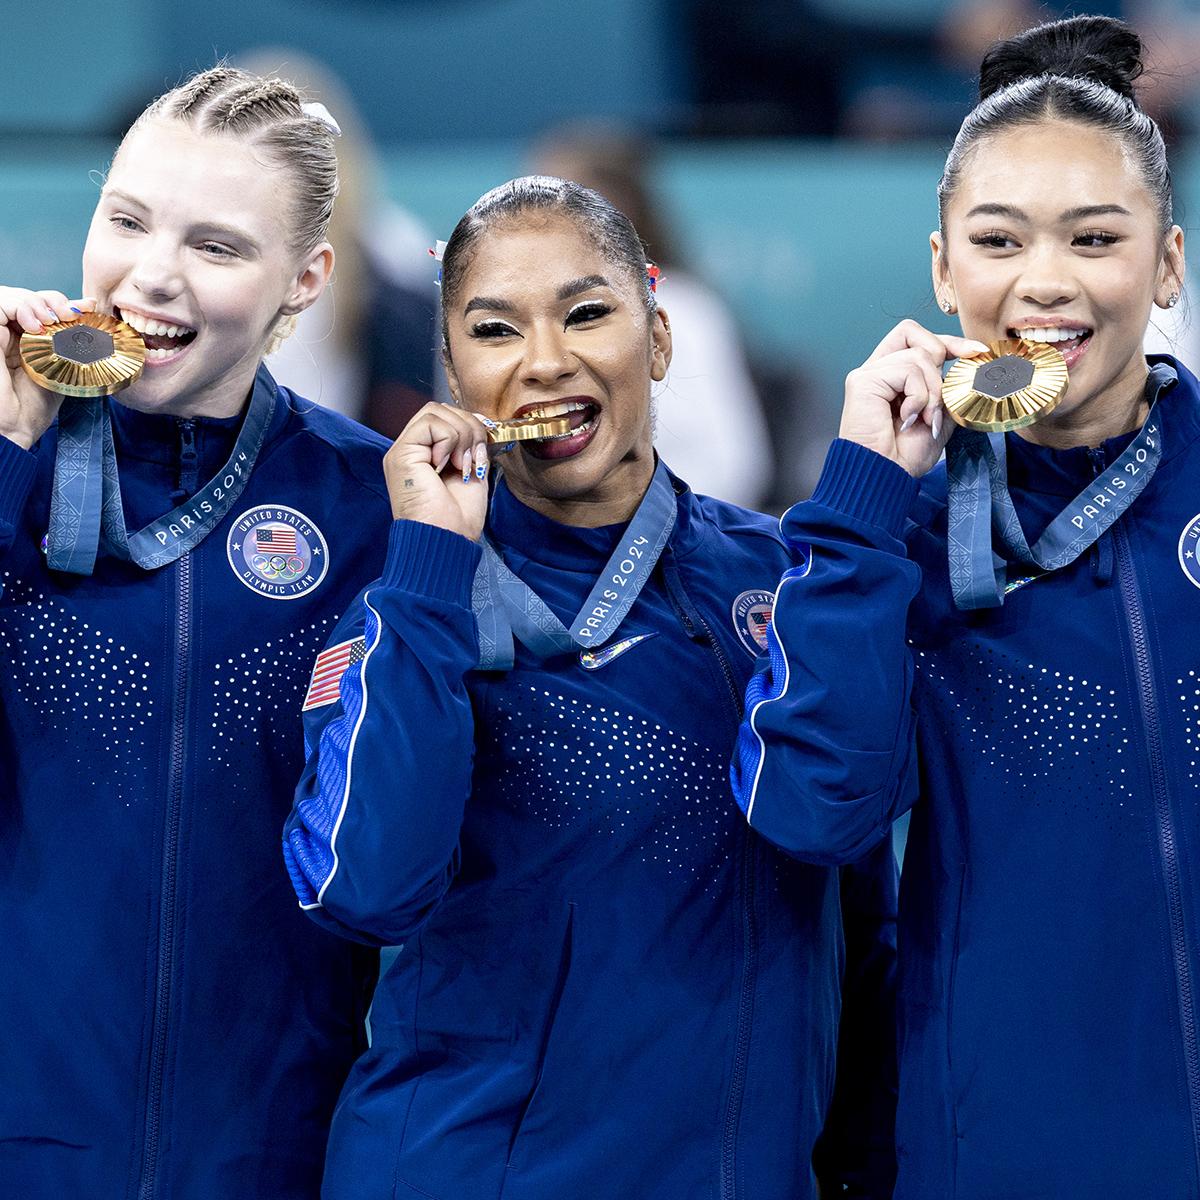 Paychecks for Team USA Gold Medal Winners Revealed